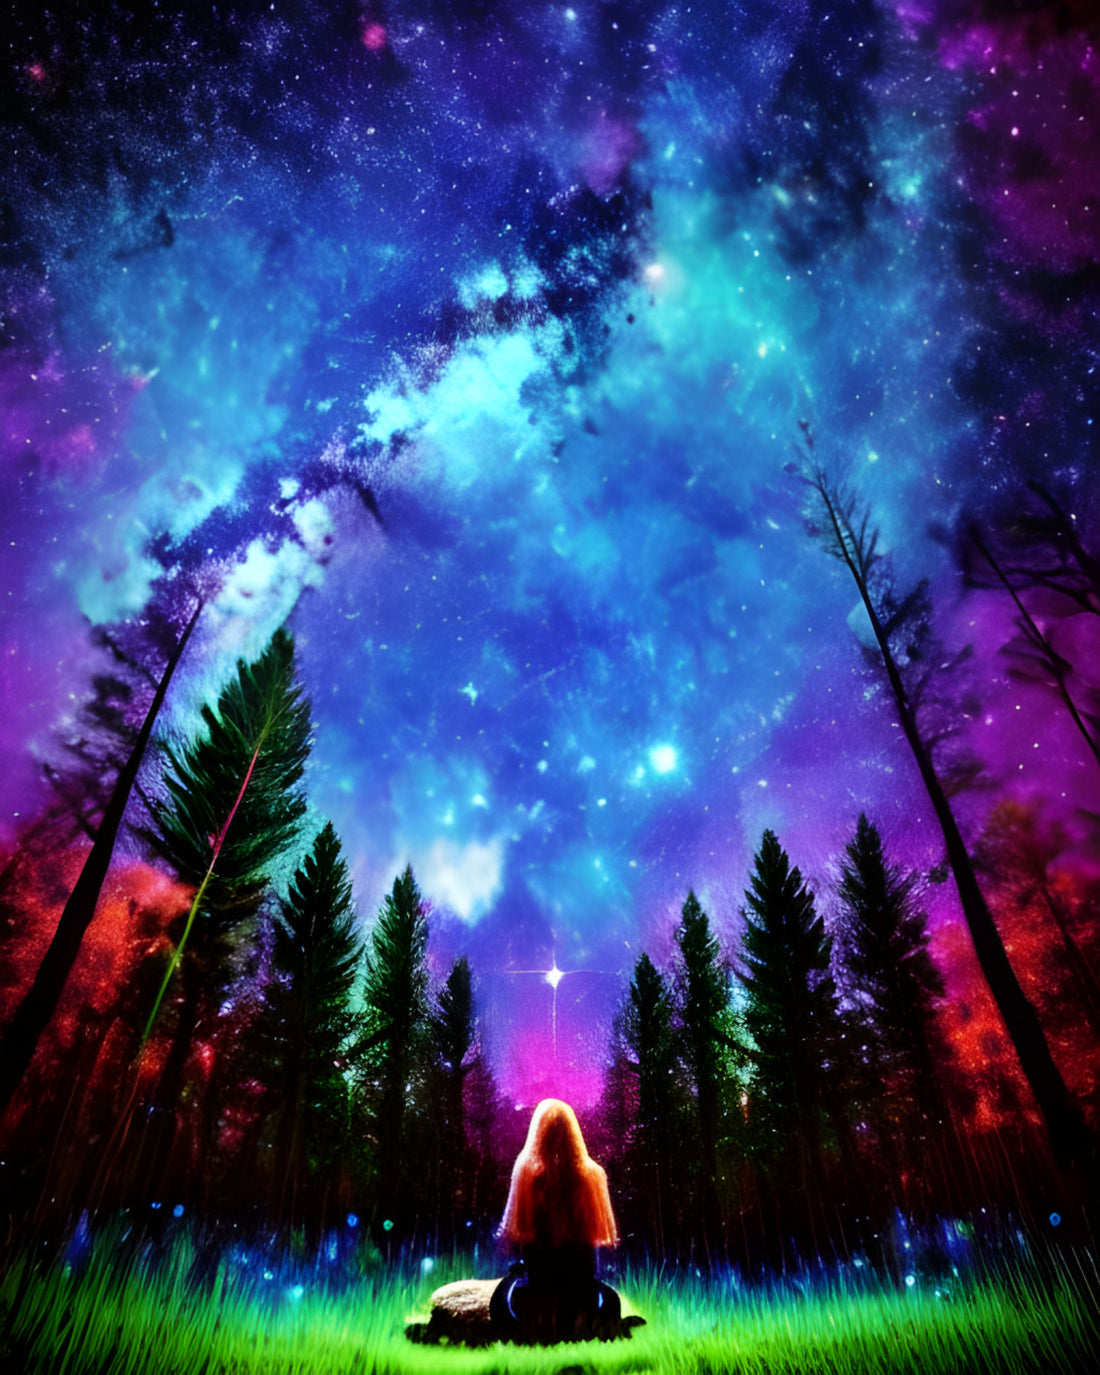 The Nebula Palace: A person sitting in a vibrant forest, surrounded by magical nebula skies. The cosmic beauty of nature offers a healing and mesmerizing experience.